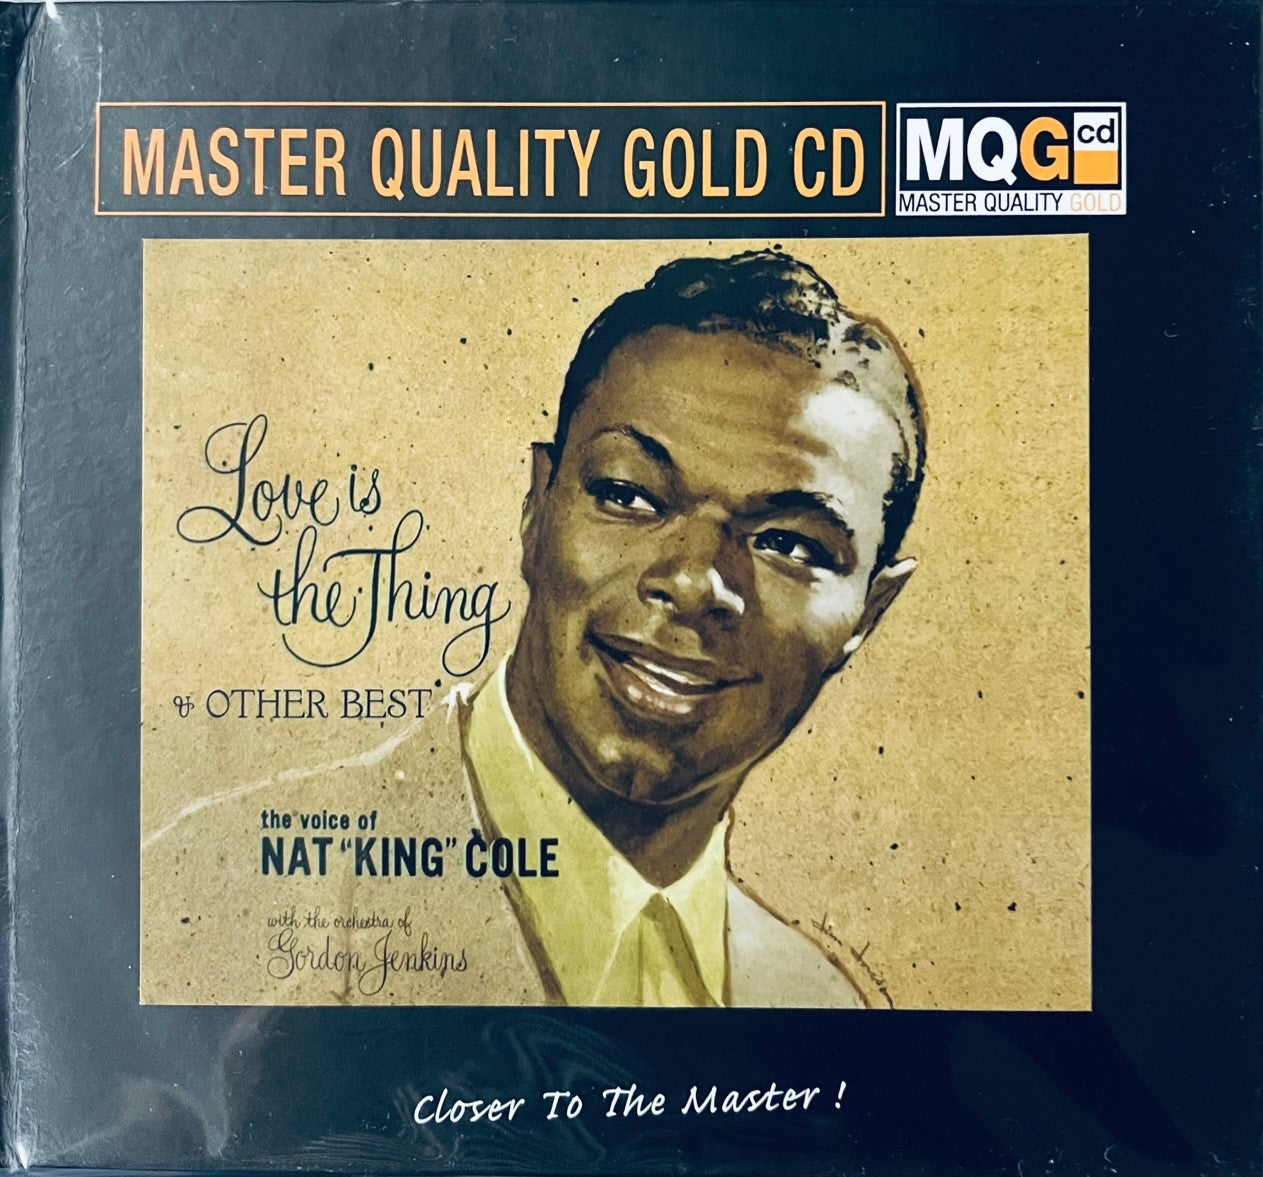 NAT KING COLE - LOVE IS THE THING AND OTHER BEST master quality (MQGCD) CD